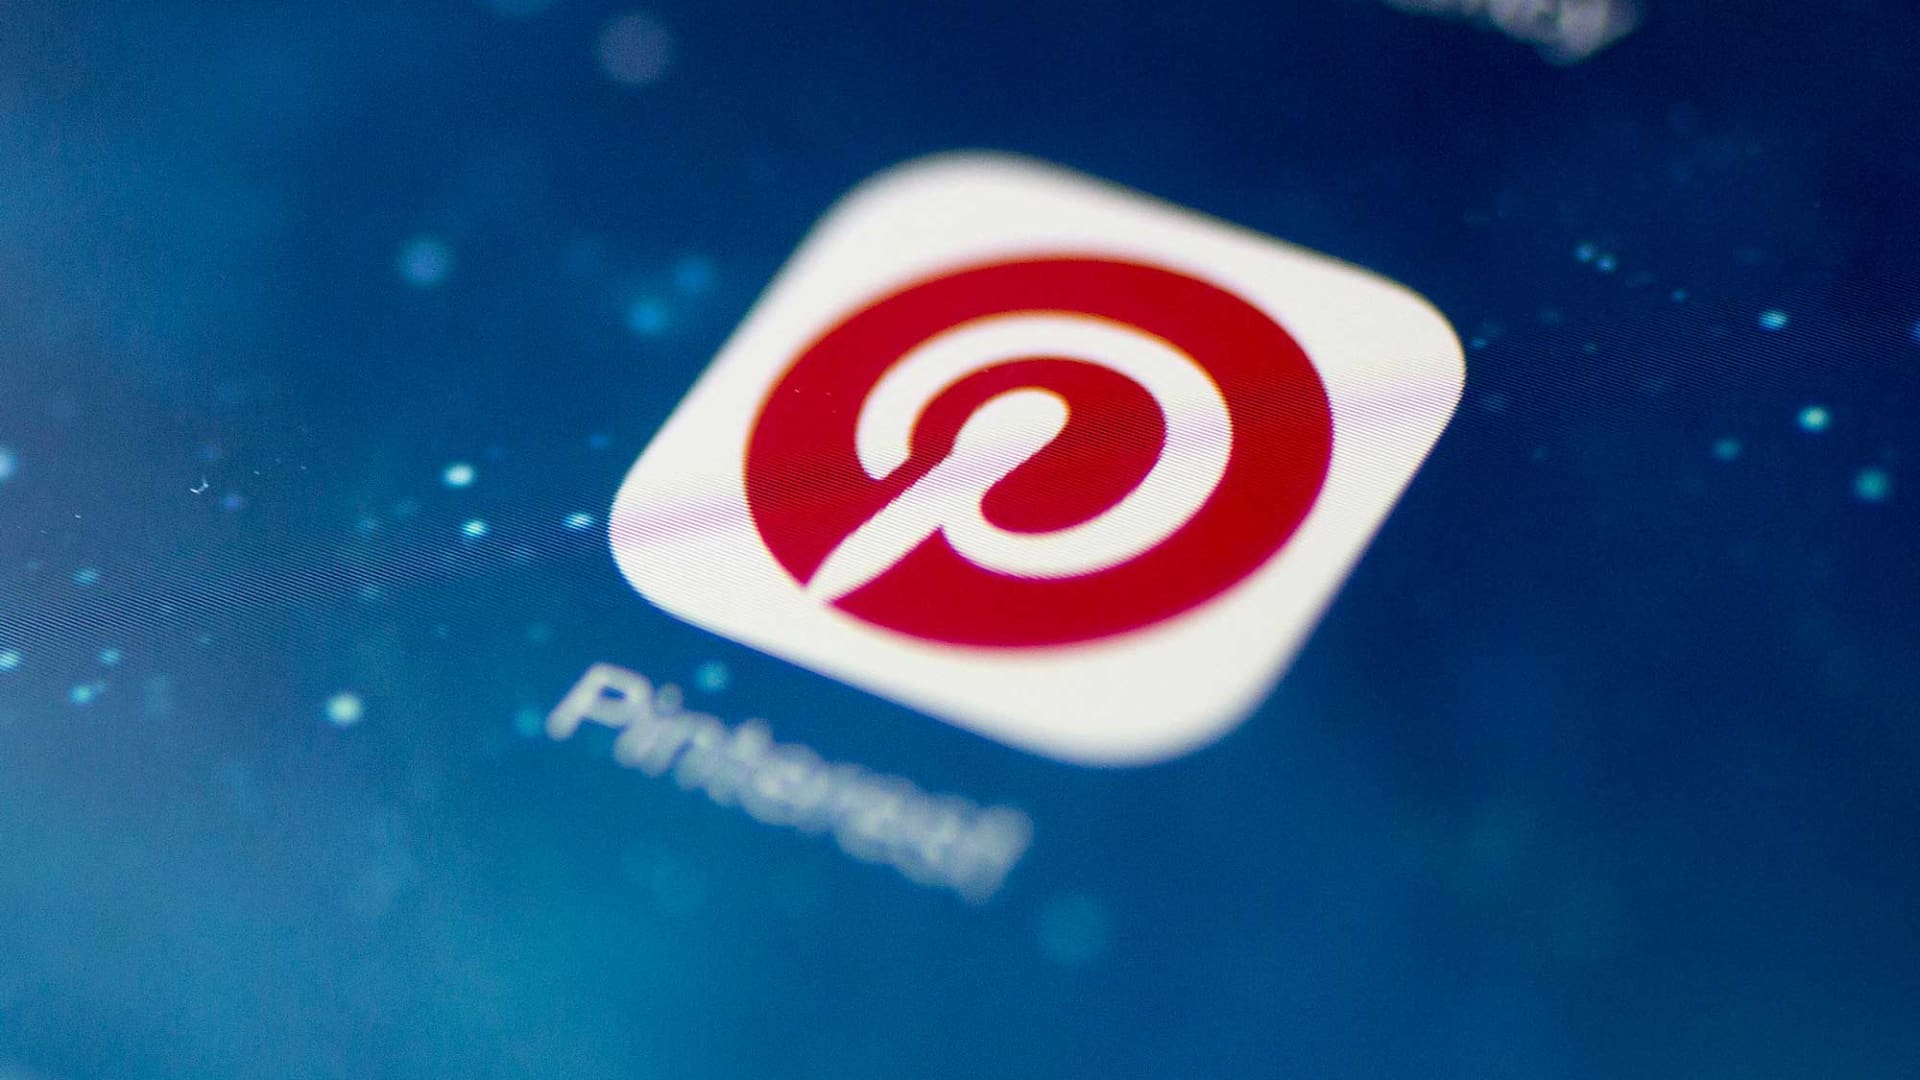 Pinterest stock surges 18% after earnings beat, advertising outlook